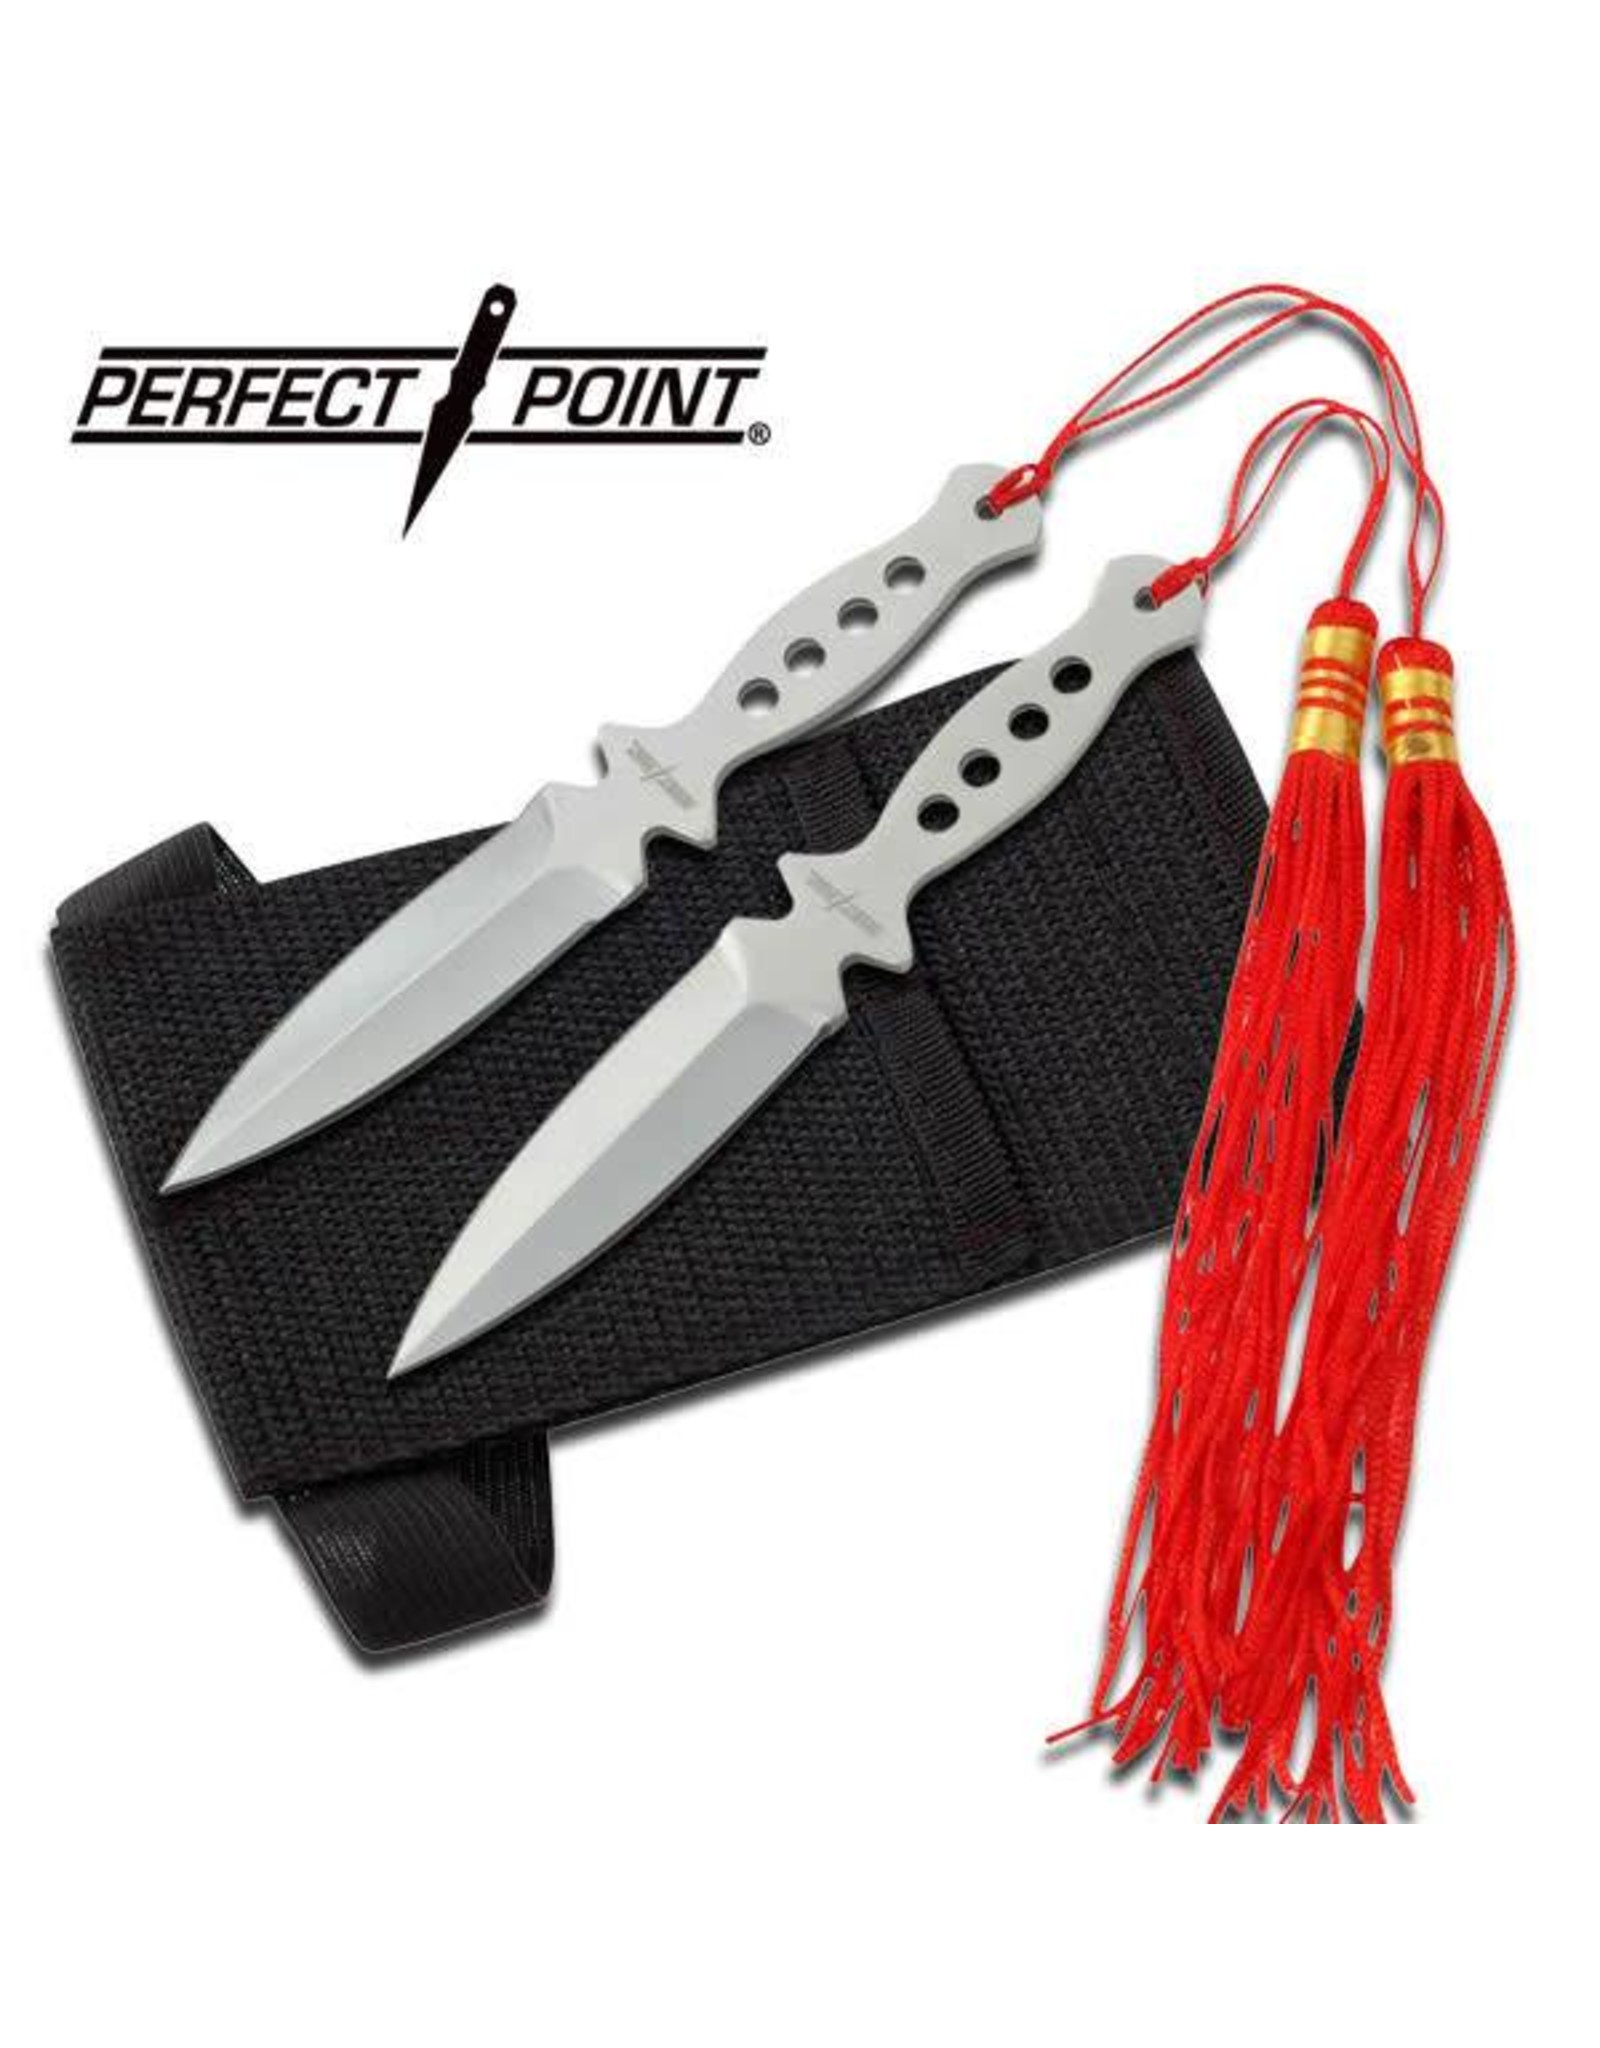 Perfect Point PERFECT POINT 90-15 THROWING KNIFE SET 5.25" OVERALL